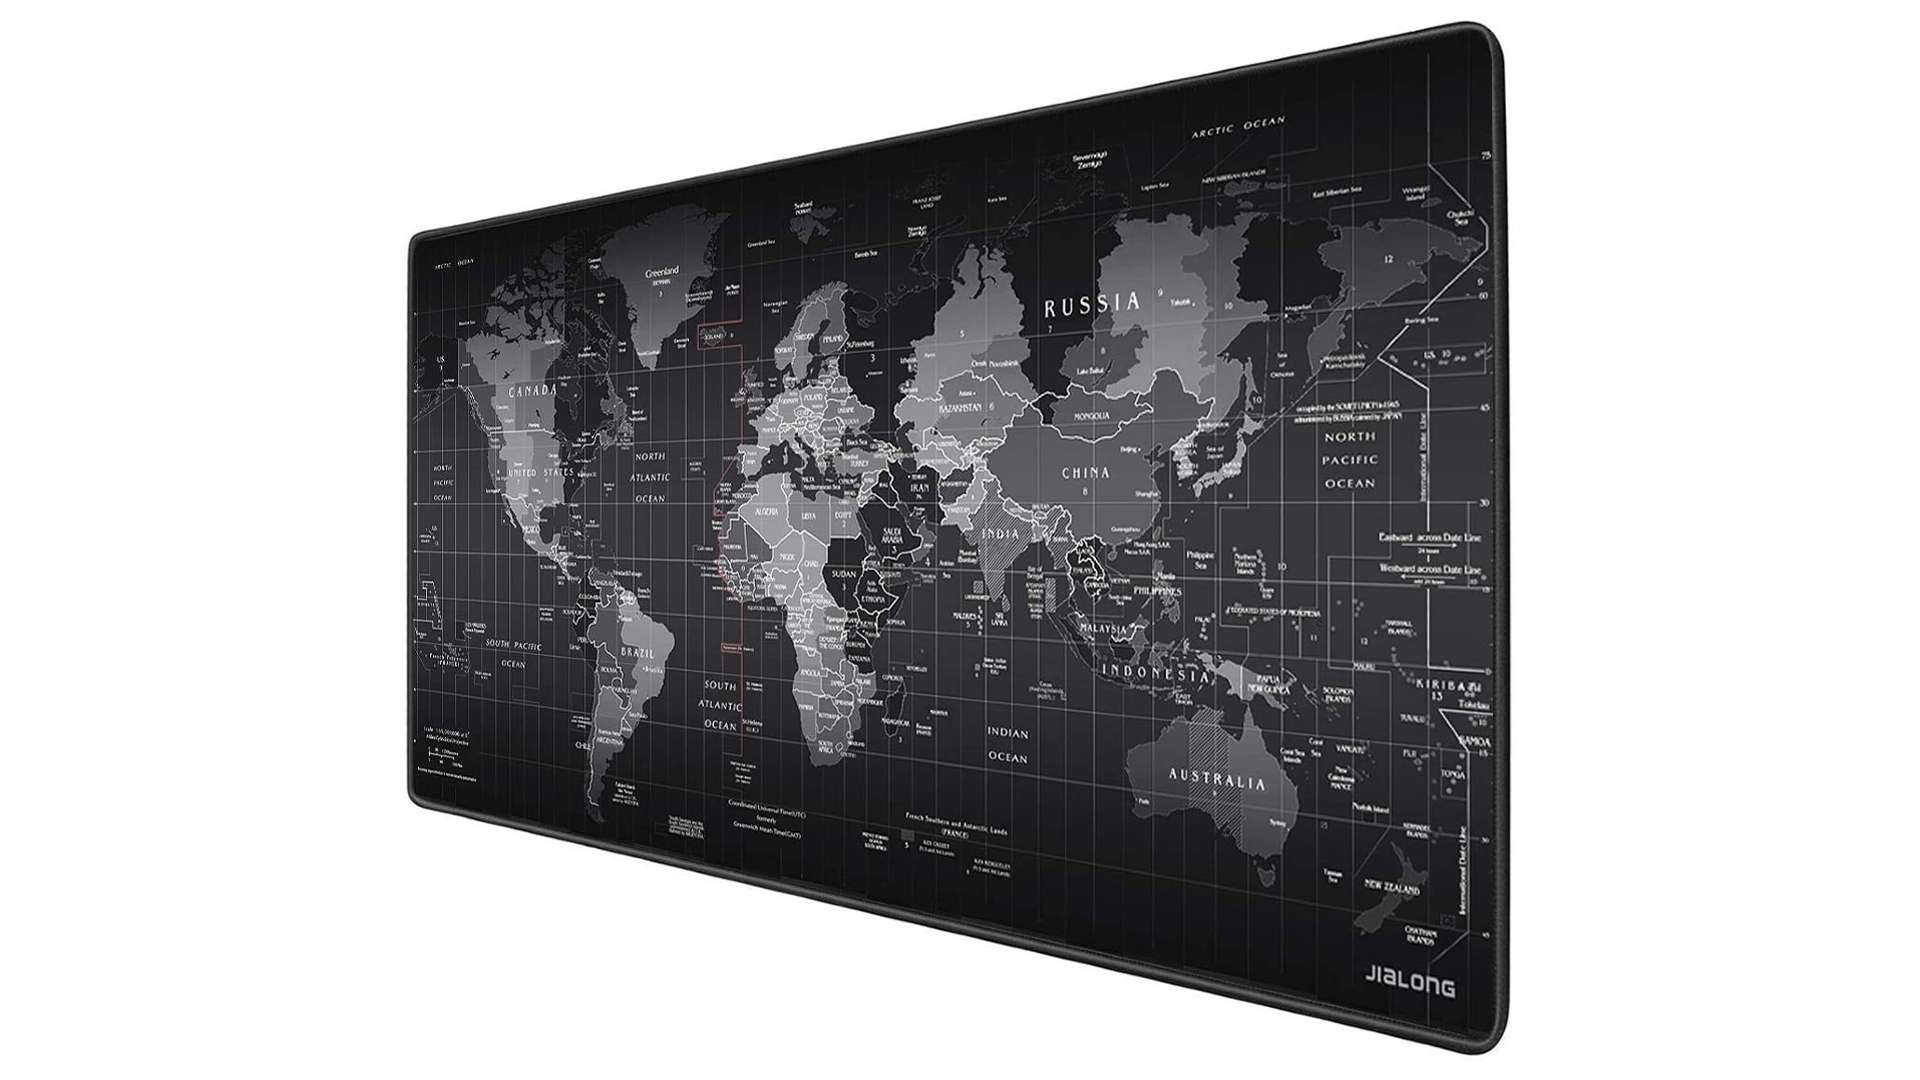 Jialong Gaming Mouse Pad with a global map printed in black and white on the surface of the mouse pad